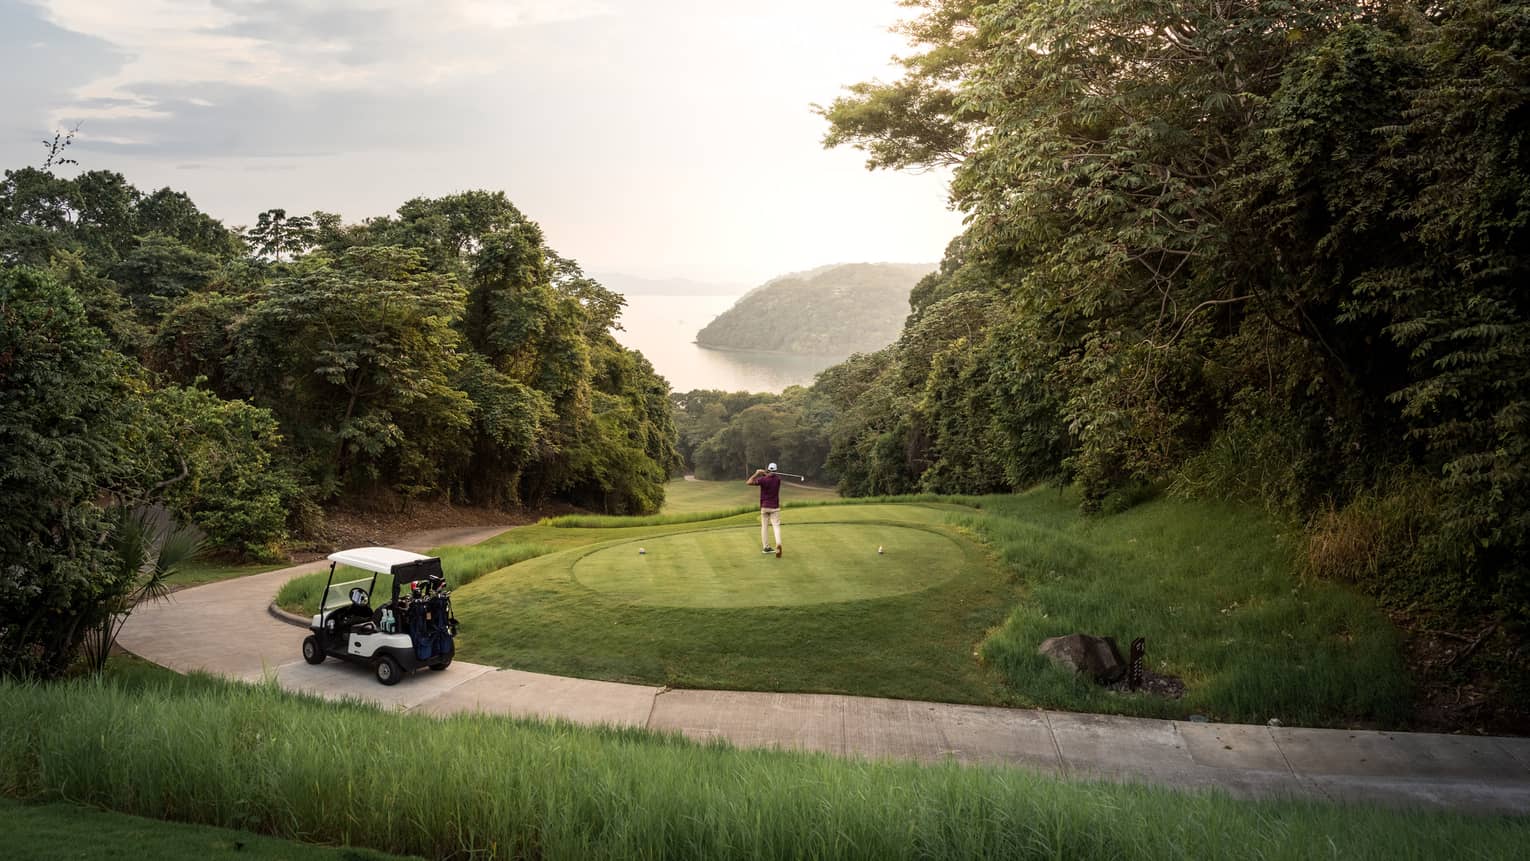 A golf cart and a person by a golf green surrounded by trees.